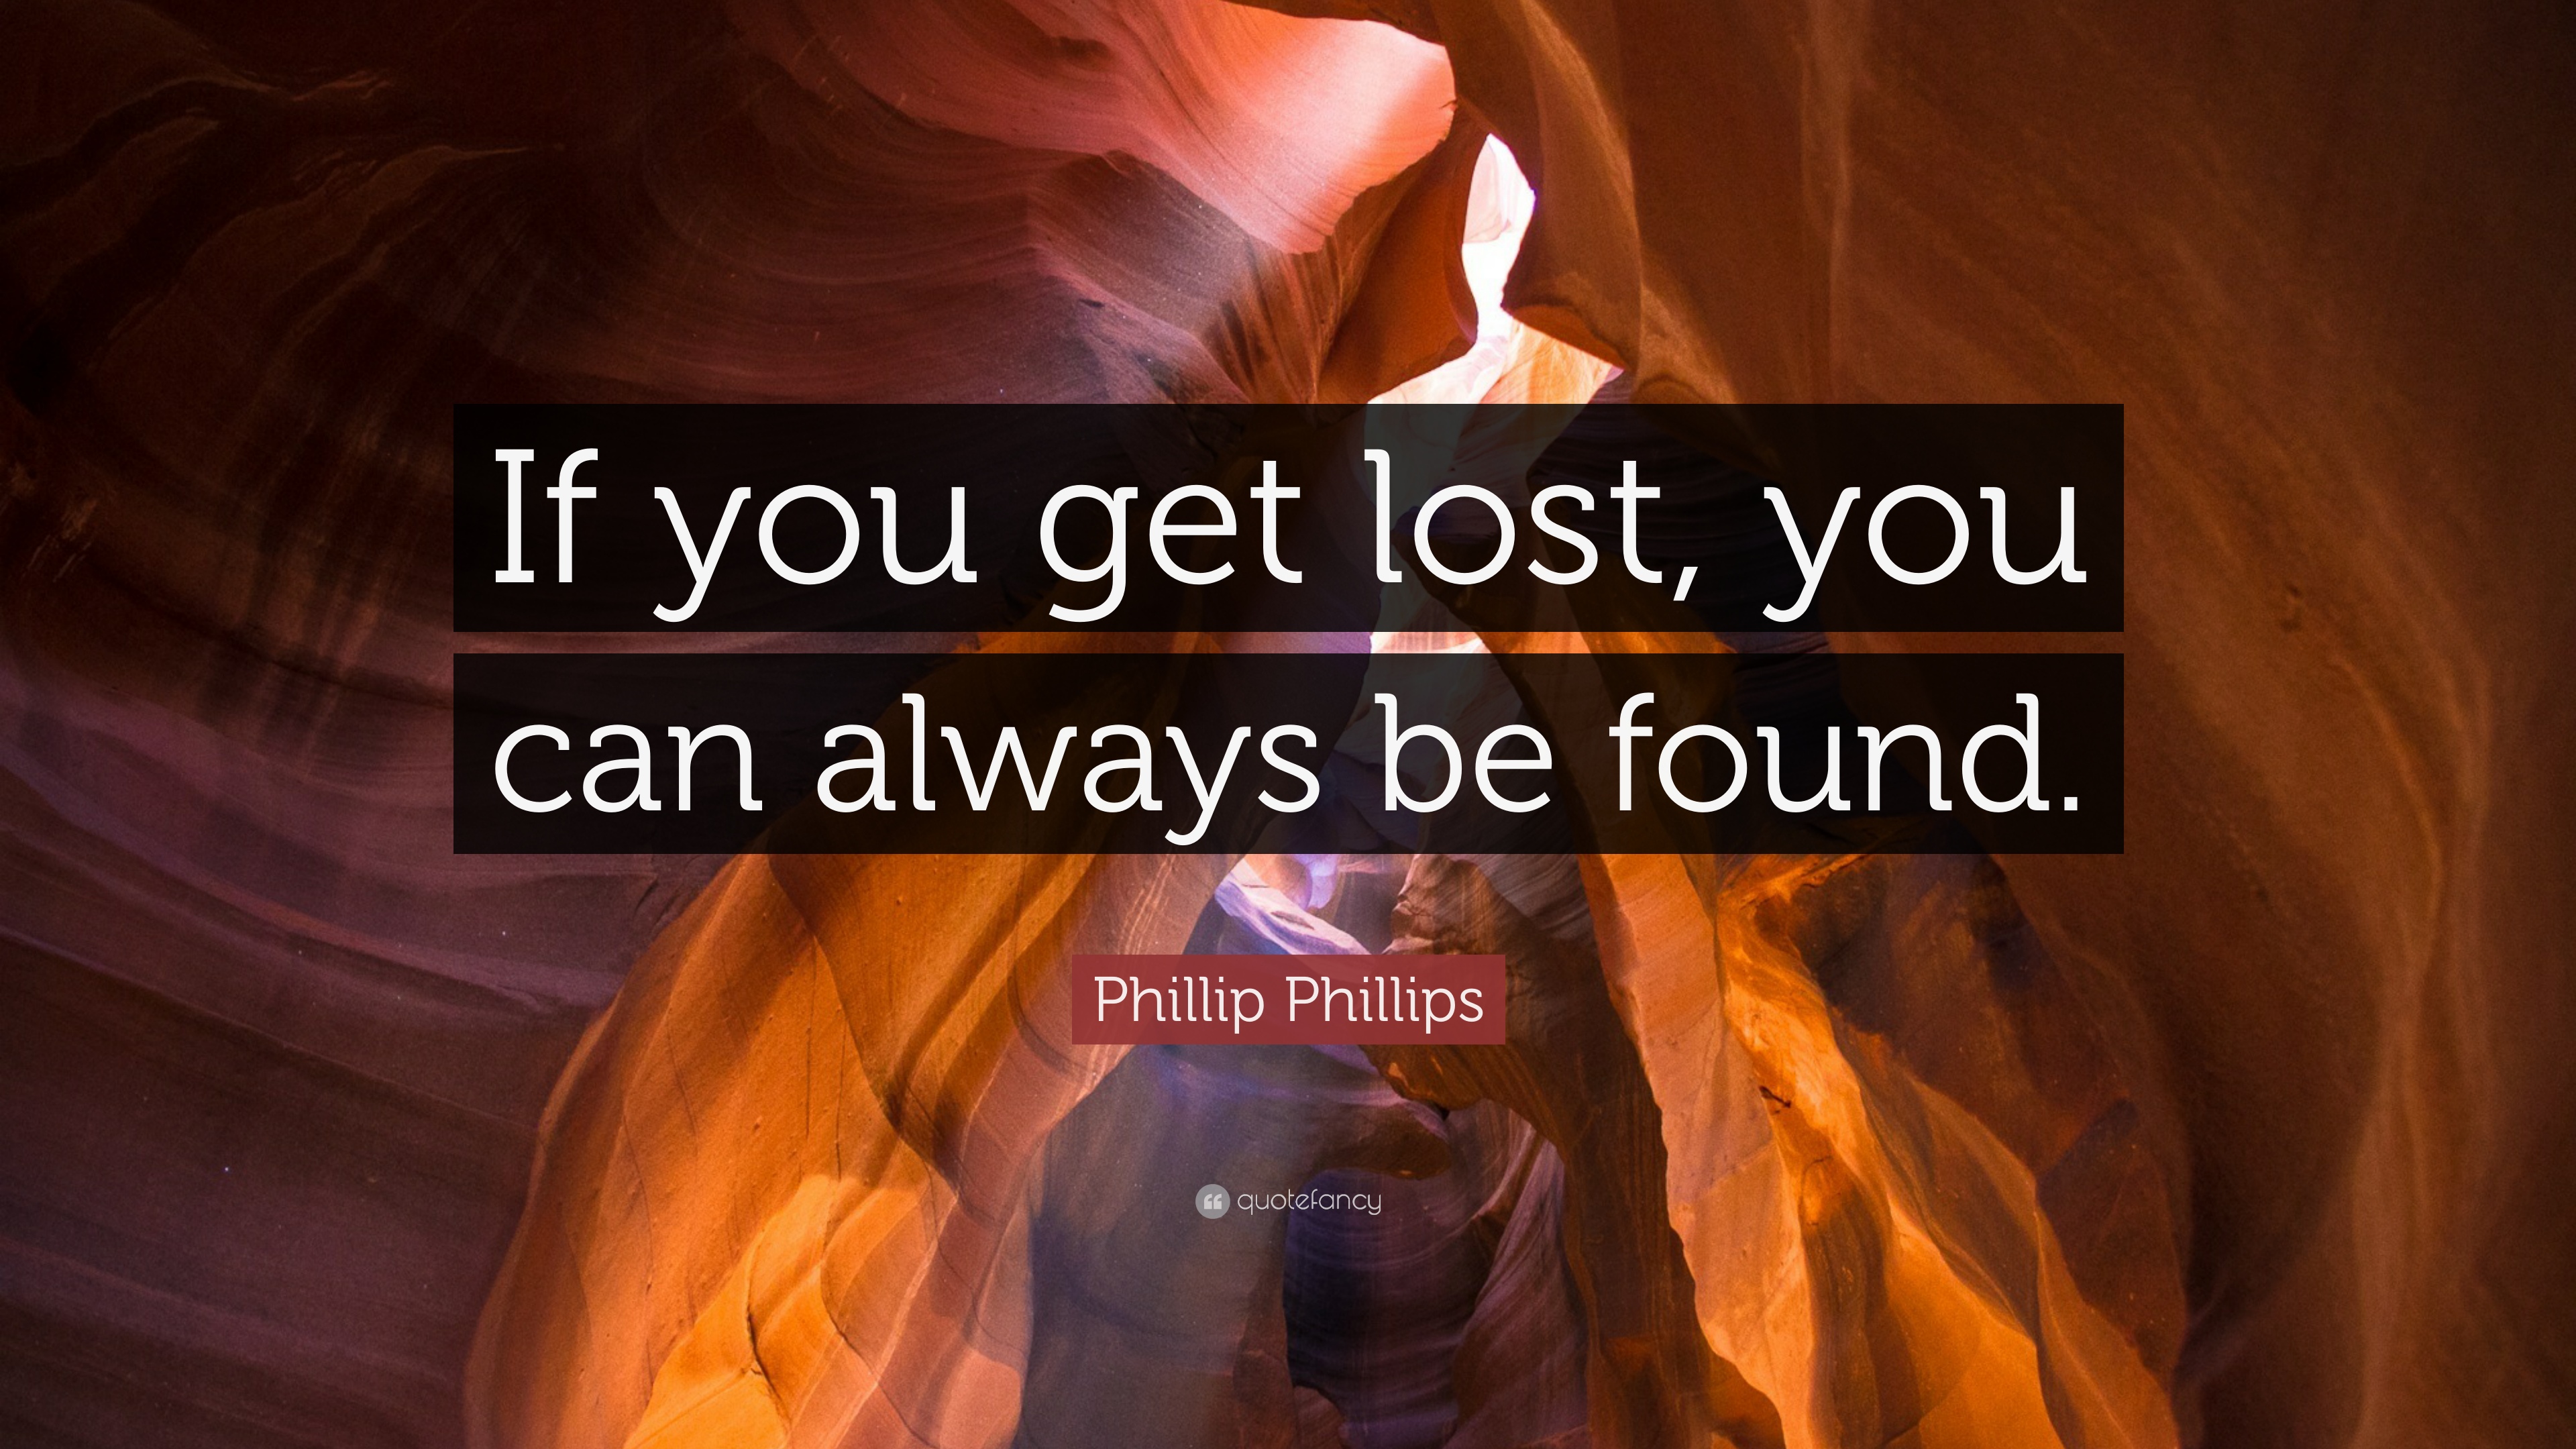 Phillip Phillips Quote: “If you get lost, you can always be found